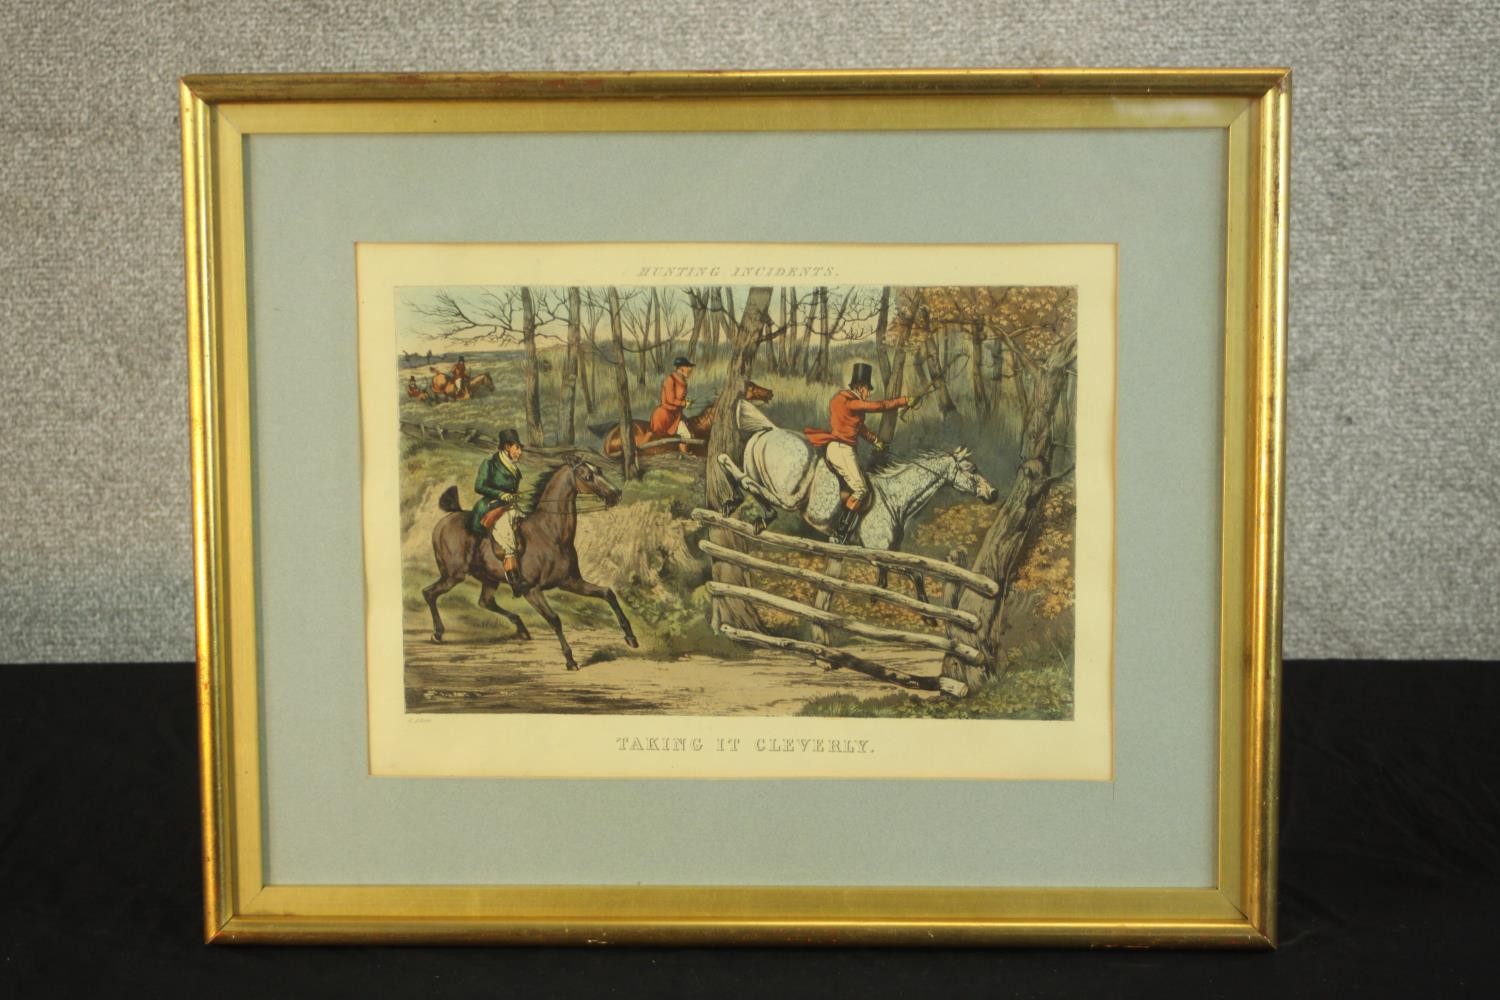 Henry Thomas Alken (1785-1851, British) Hunting Incidents - Taking it Cleverly, fox hunting - Image 2 of 5